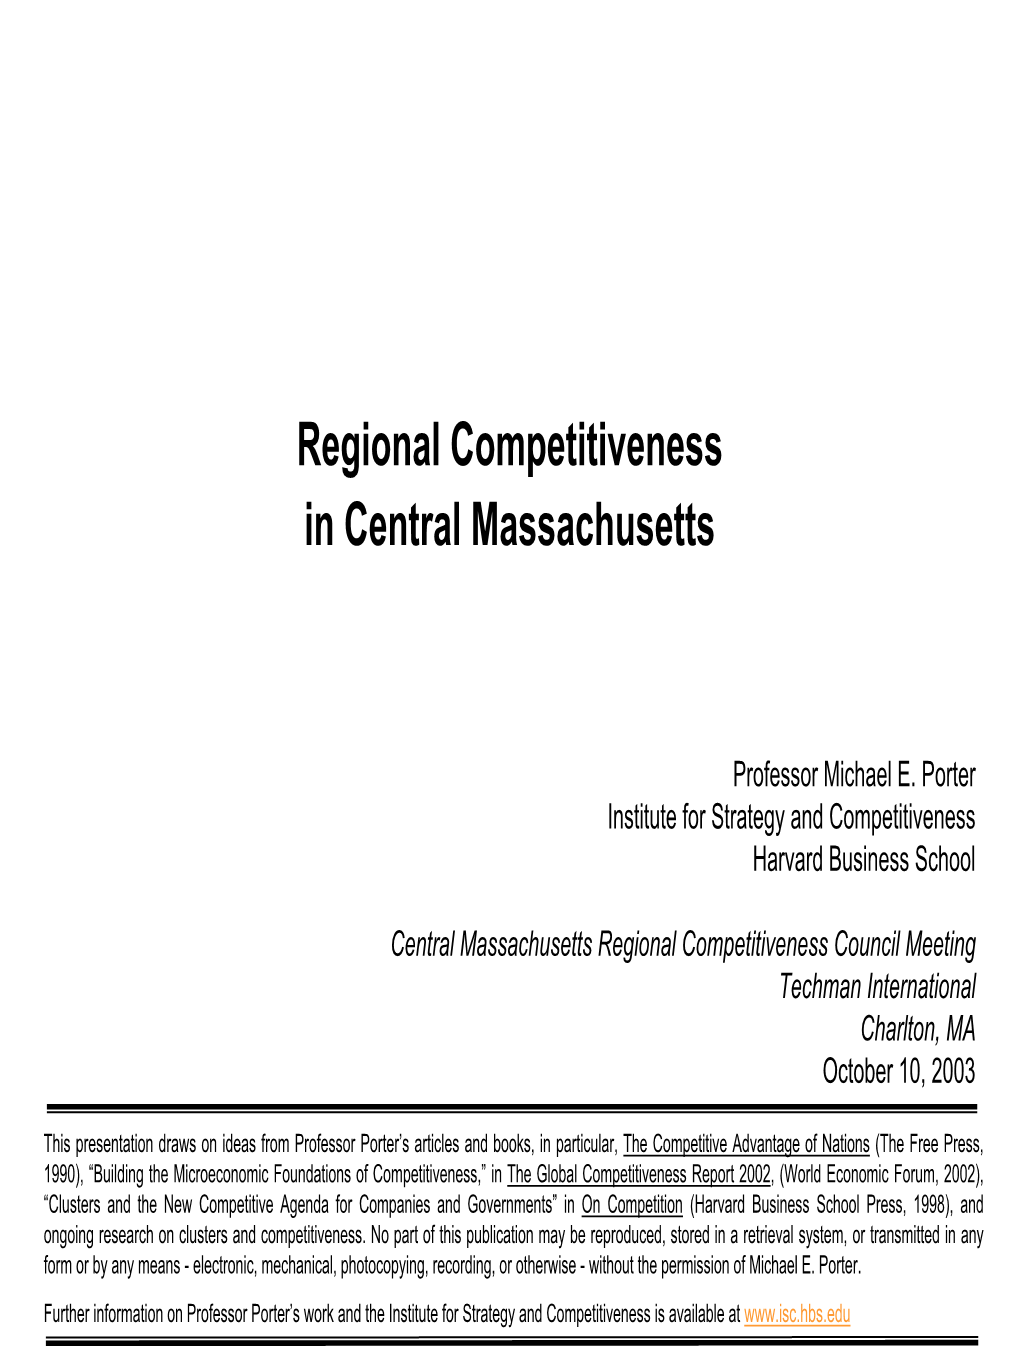 "Regional Competitiveness in Central Massachusetts." (Pdf)